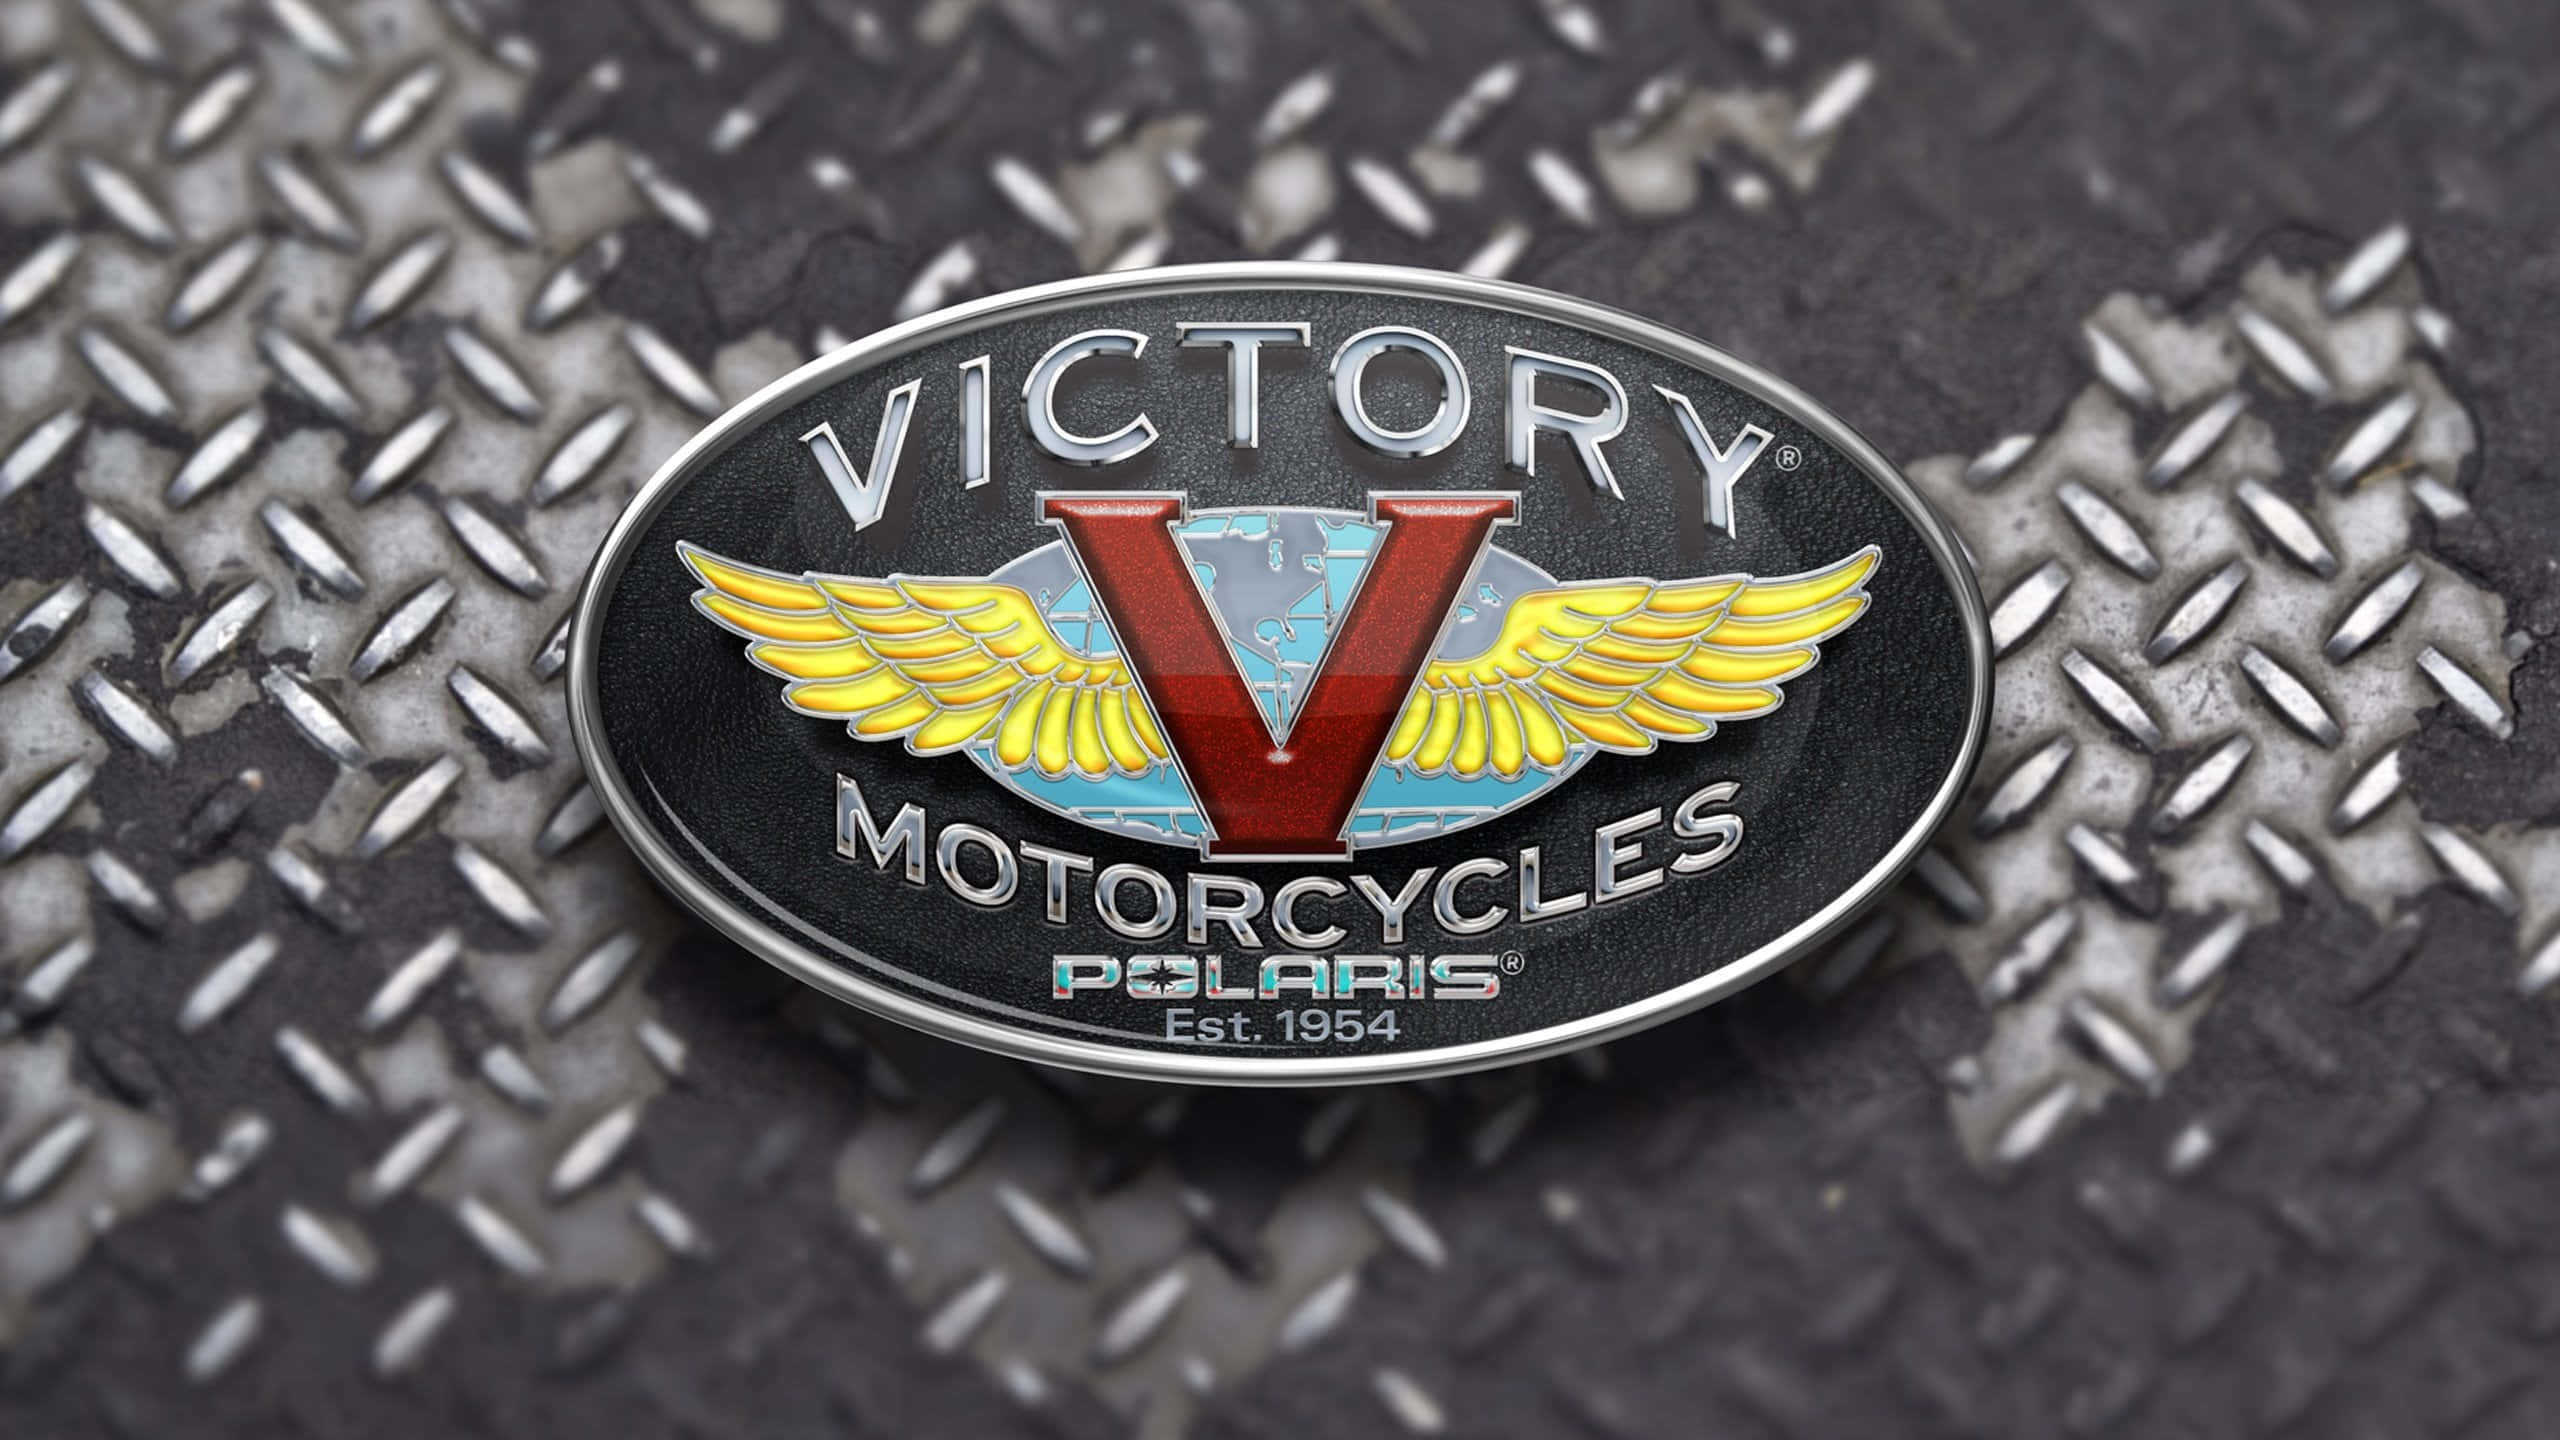 A Stunning Victory Motorcycle Ready To Hit The Road